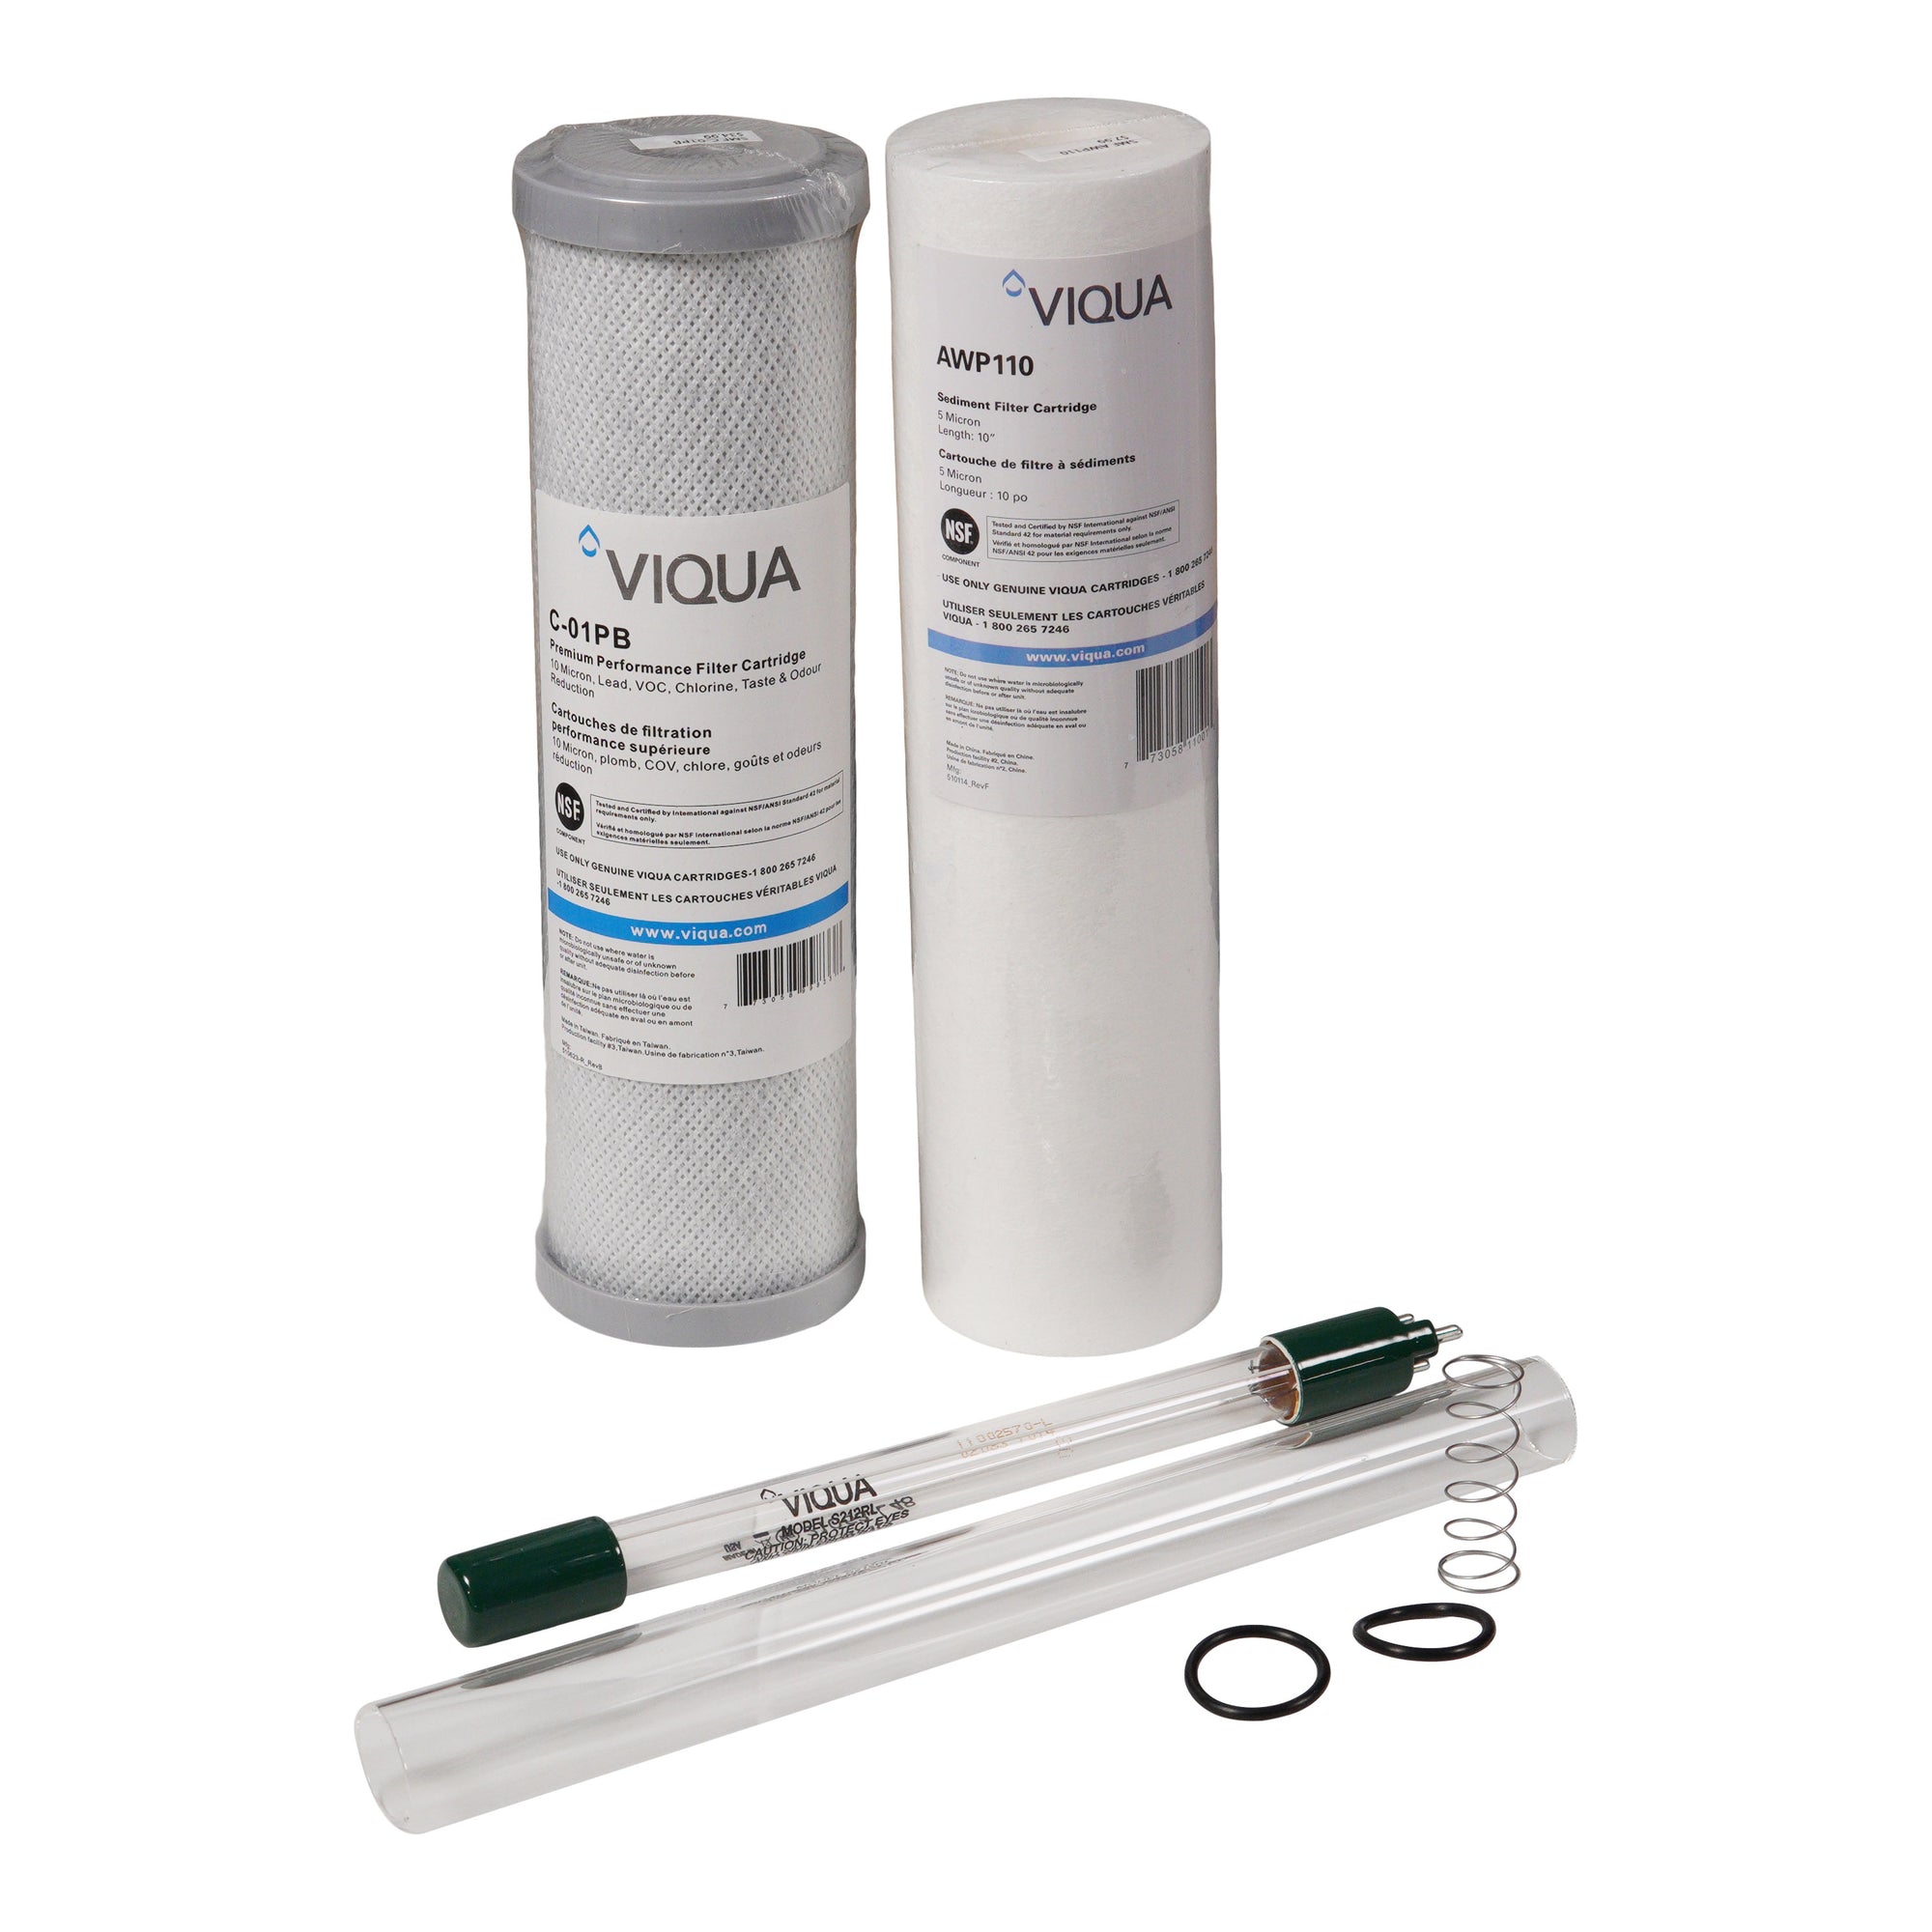 Viqua VT1-DWS Replacement UV Lamp, Sleeve and Filter